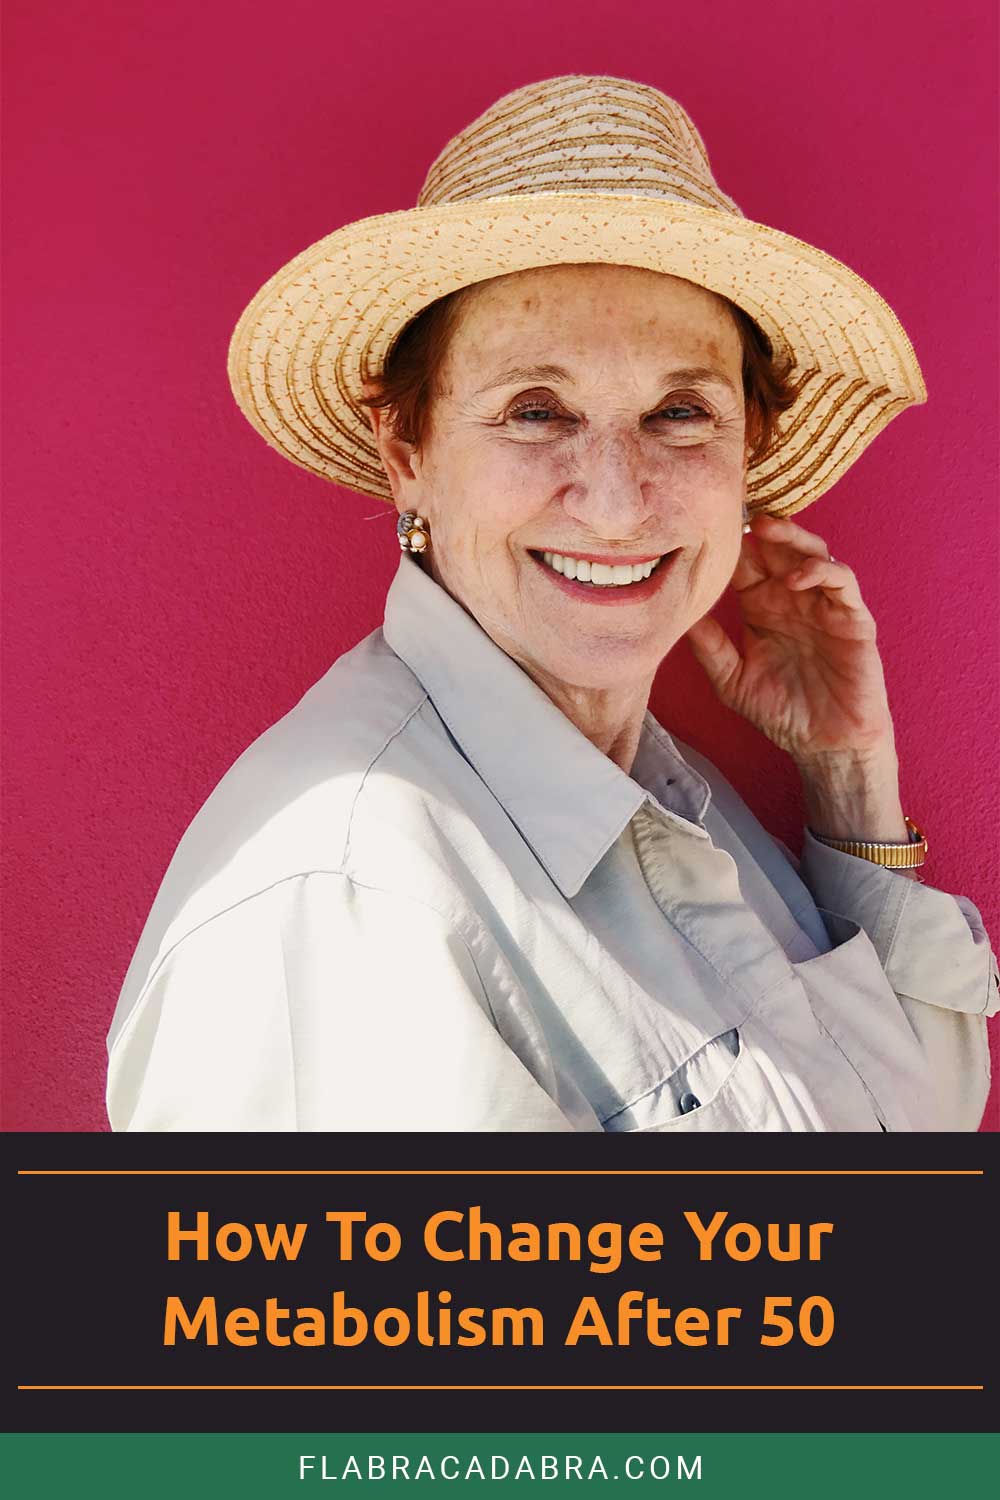 Old lady with hat smiling - How To Change Your Metabolism After 50